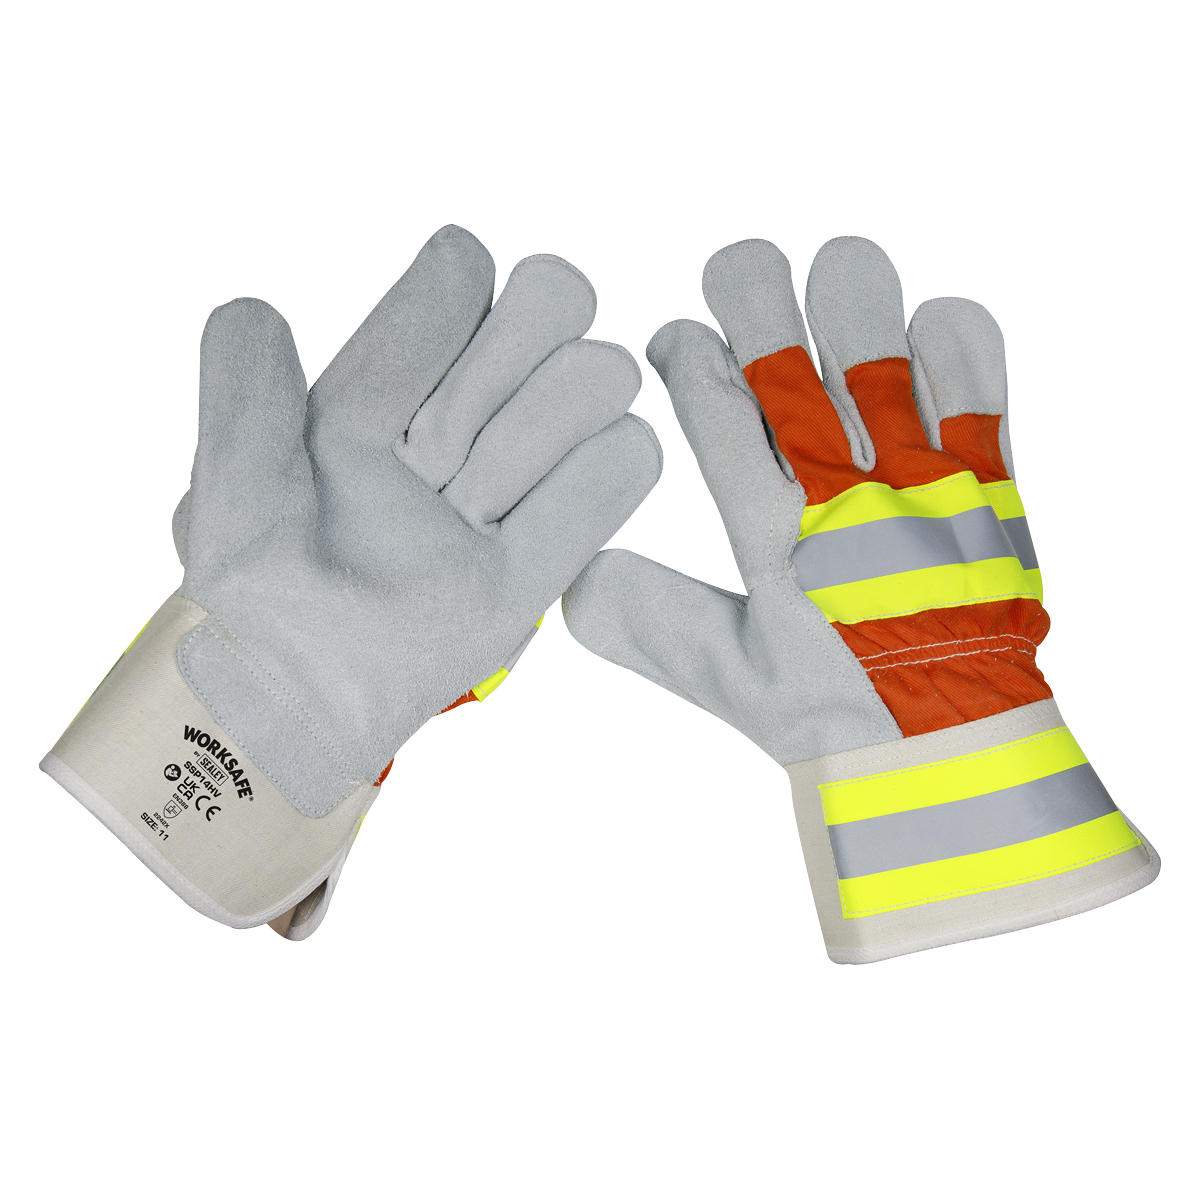 Reflective Rigger's Gloves Pair